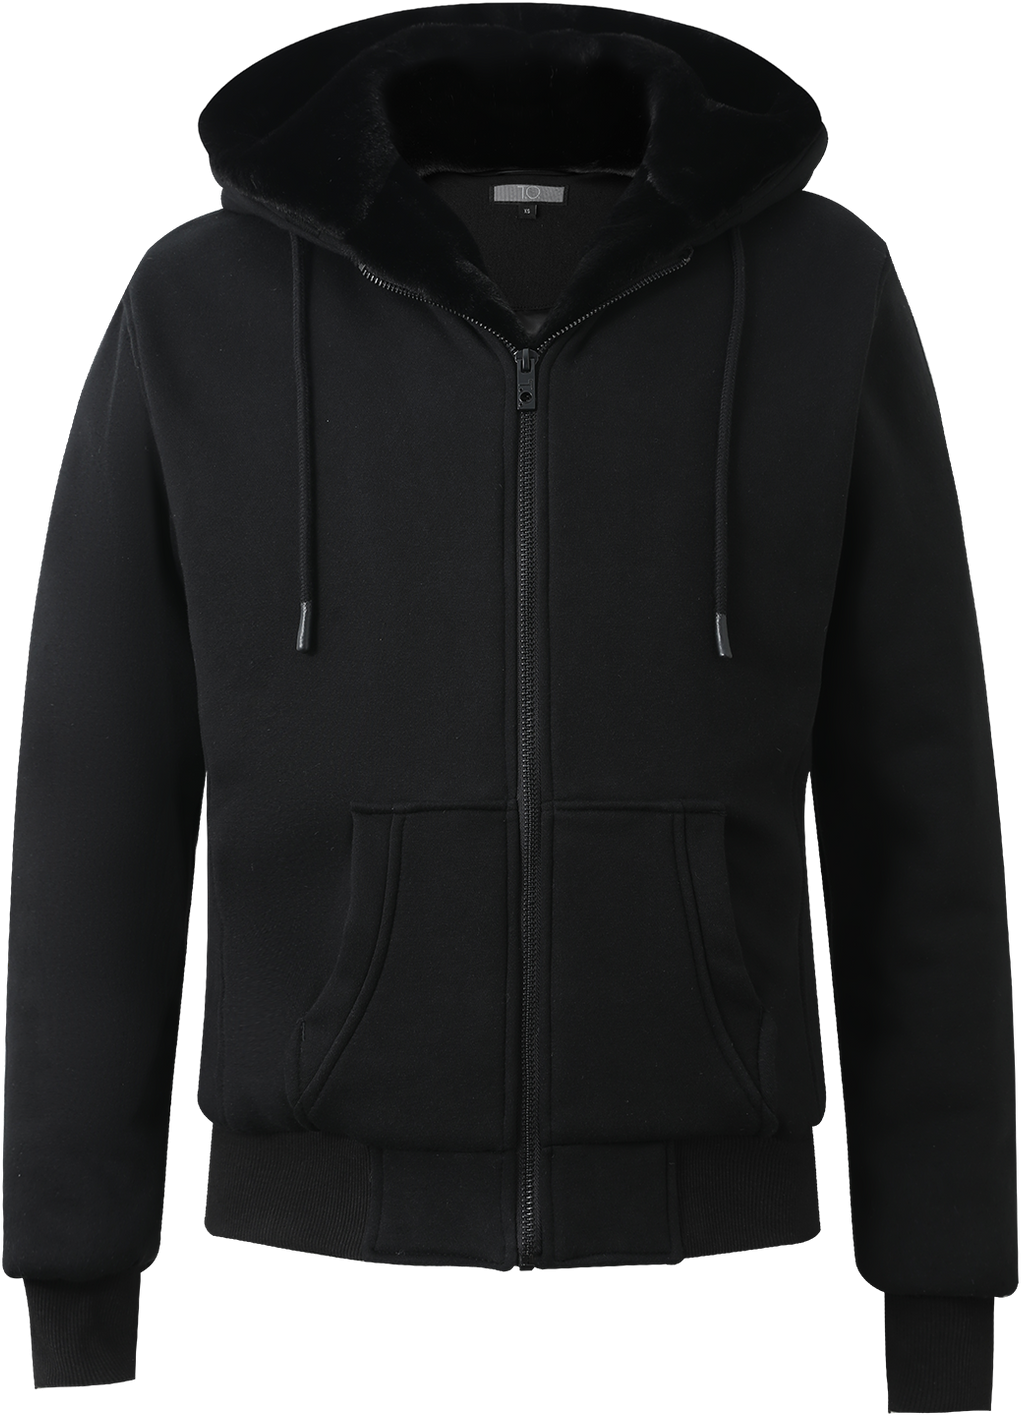 Buy Men's Super Combed Cotton Rich Pique Fabric Ribbed Cuff Hoodie Jacket -  Black AM61 | Jockey India